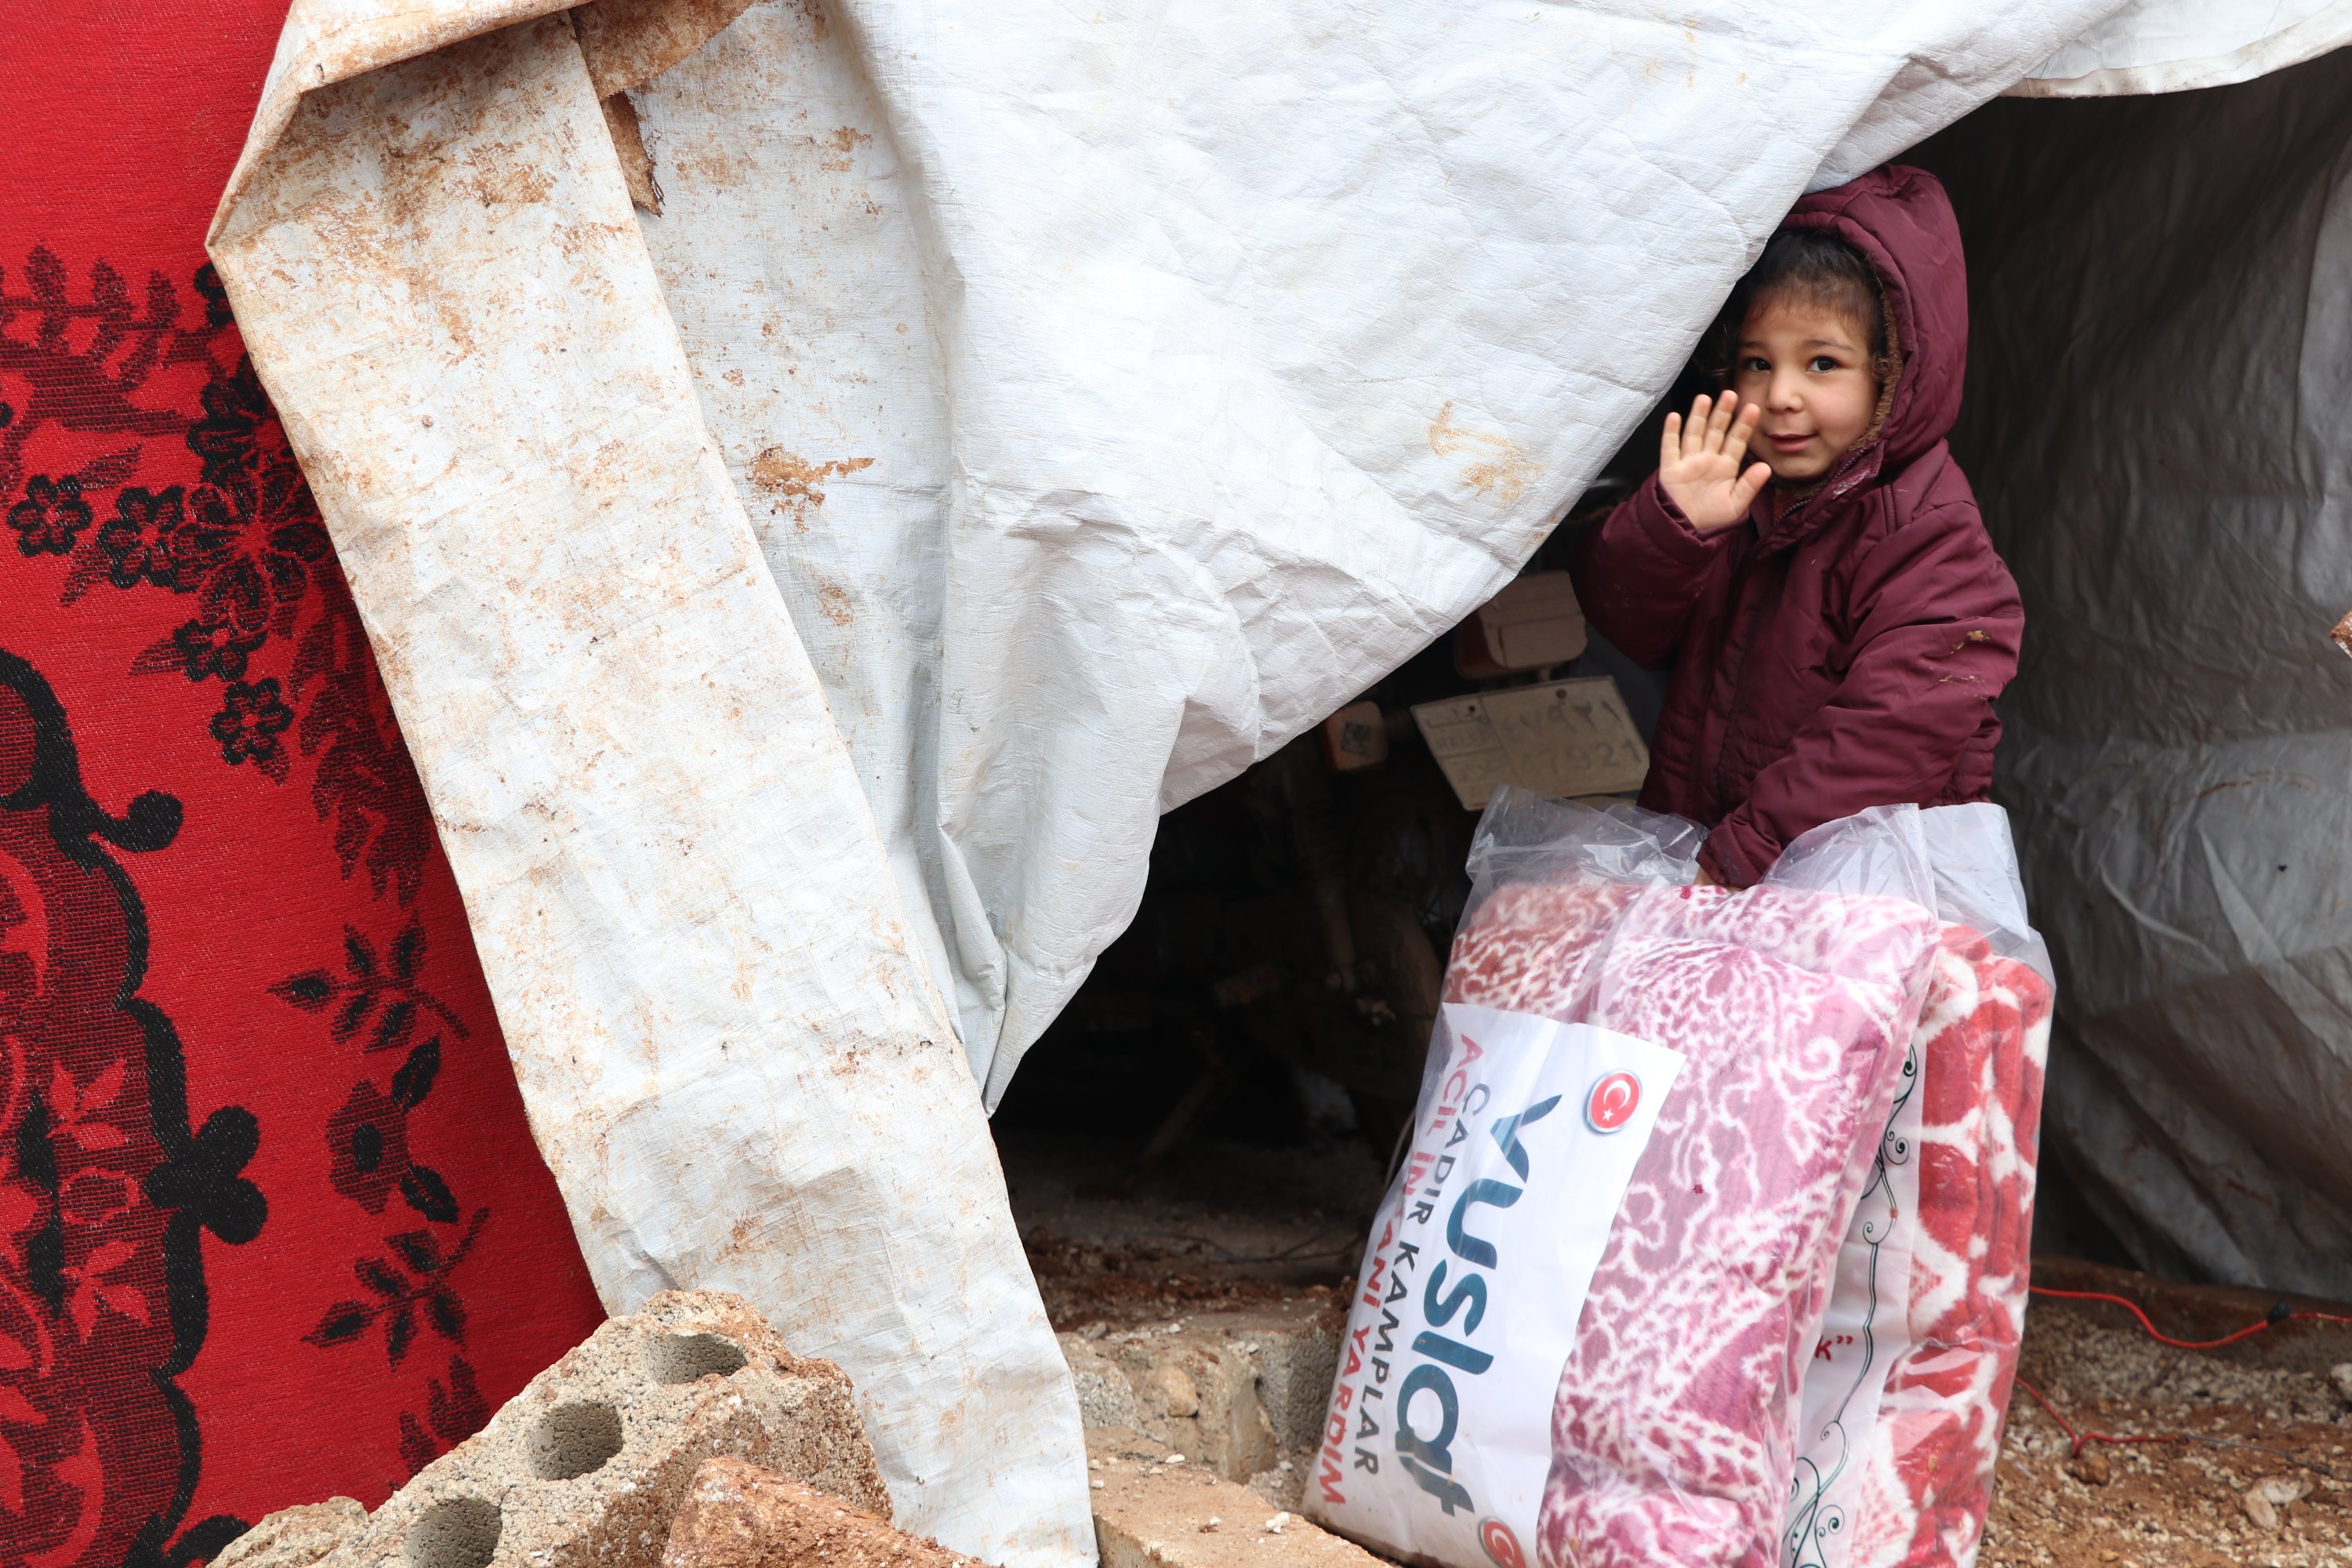 A little girl waves as she enters her tent with the aid kit, Idlib, northwestern Syria, Feb. 1, 2022. (AA Photo)